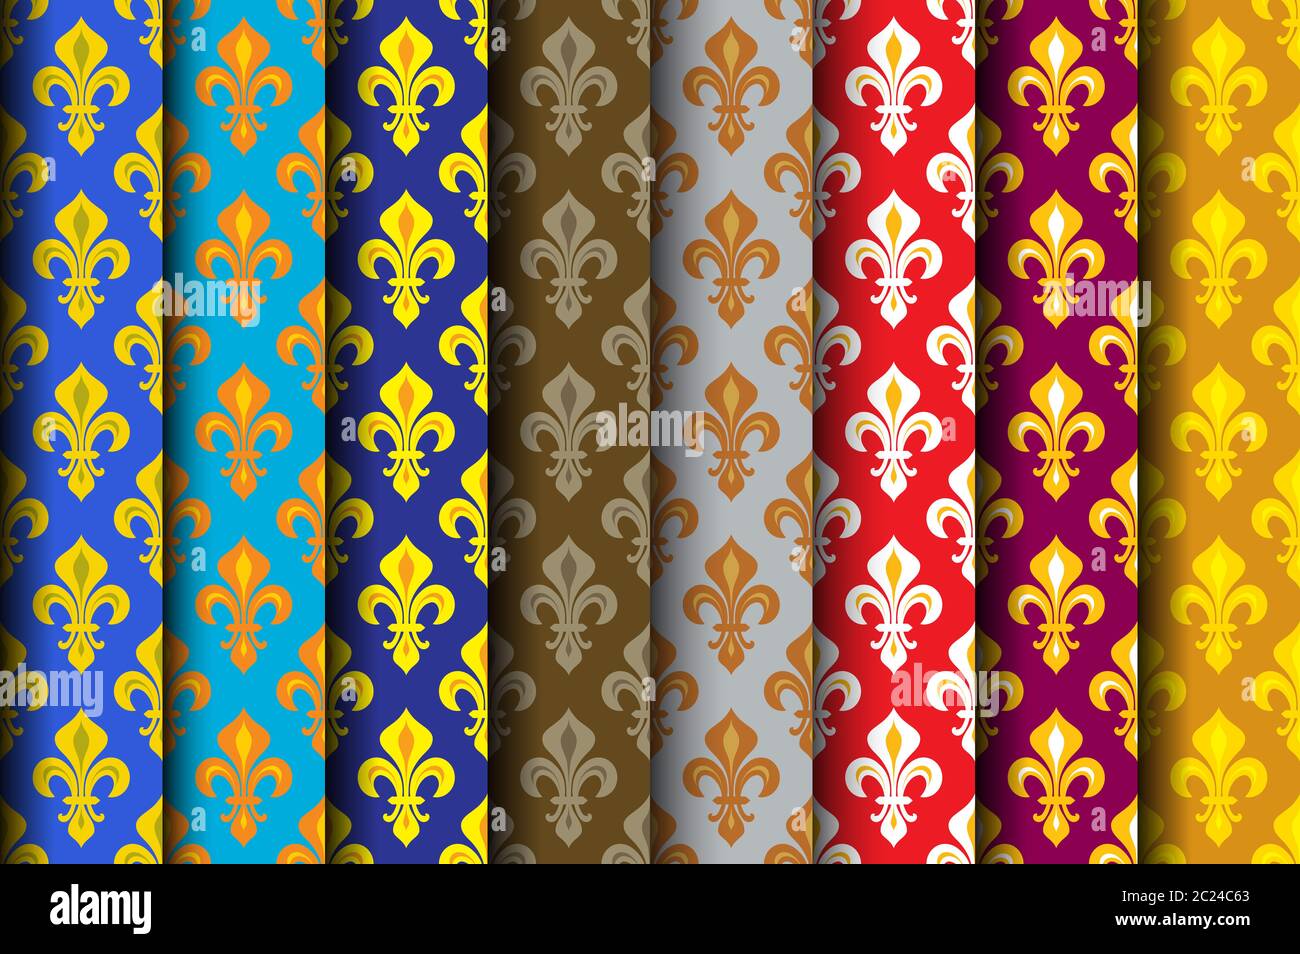 Fleur De Lis Pattern High Resolution Stock Photography and Images - Alamy